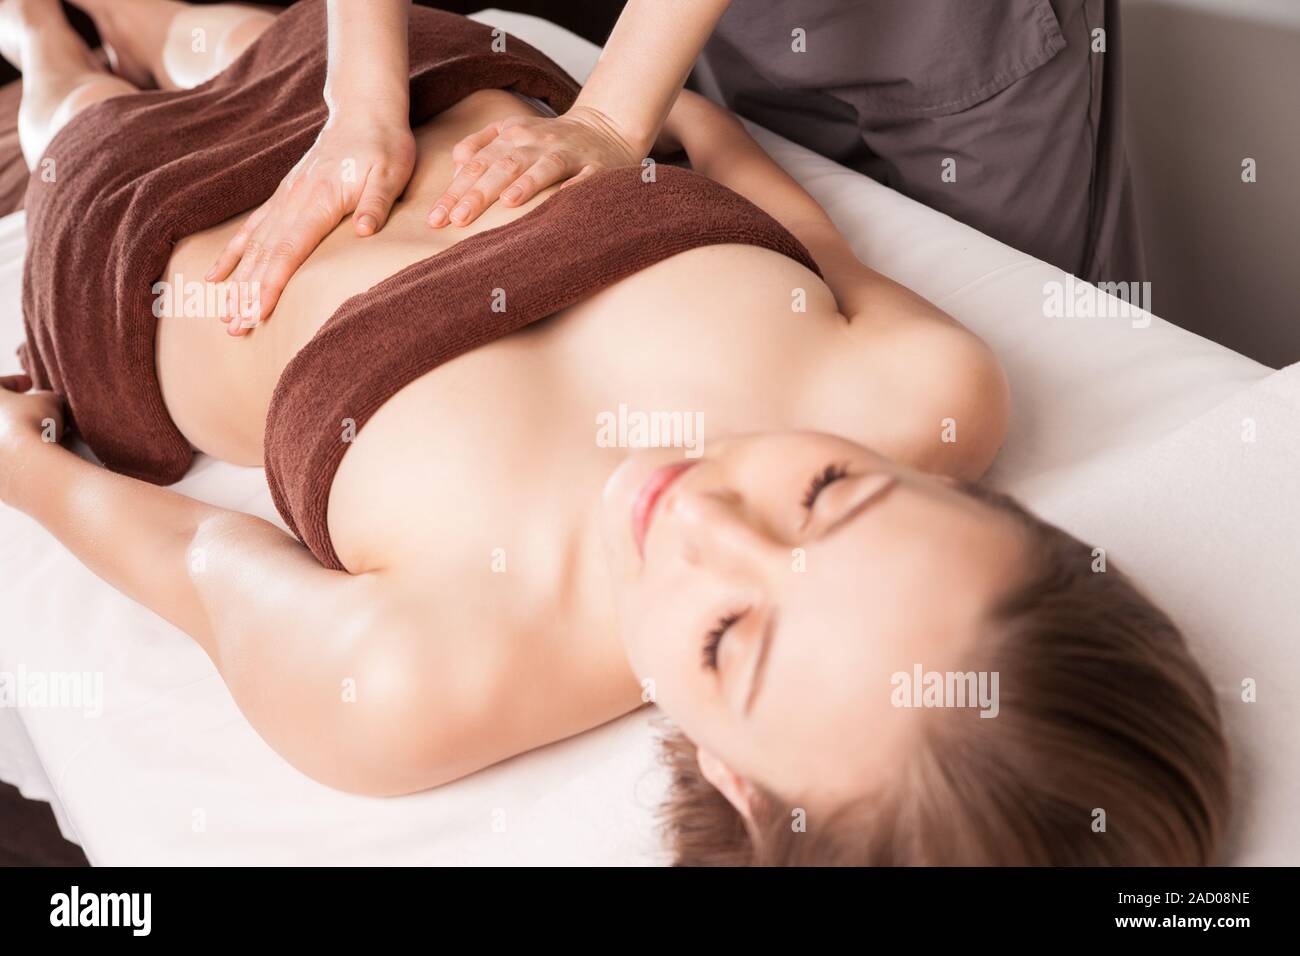 Ayurveda therapeutic arm massage with ethereal oil - Stock Image